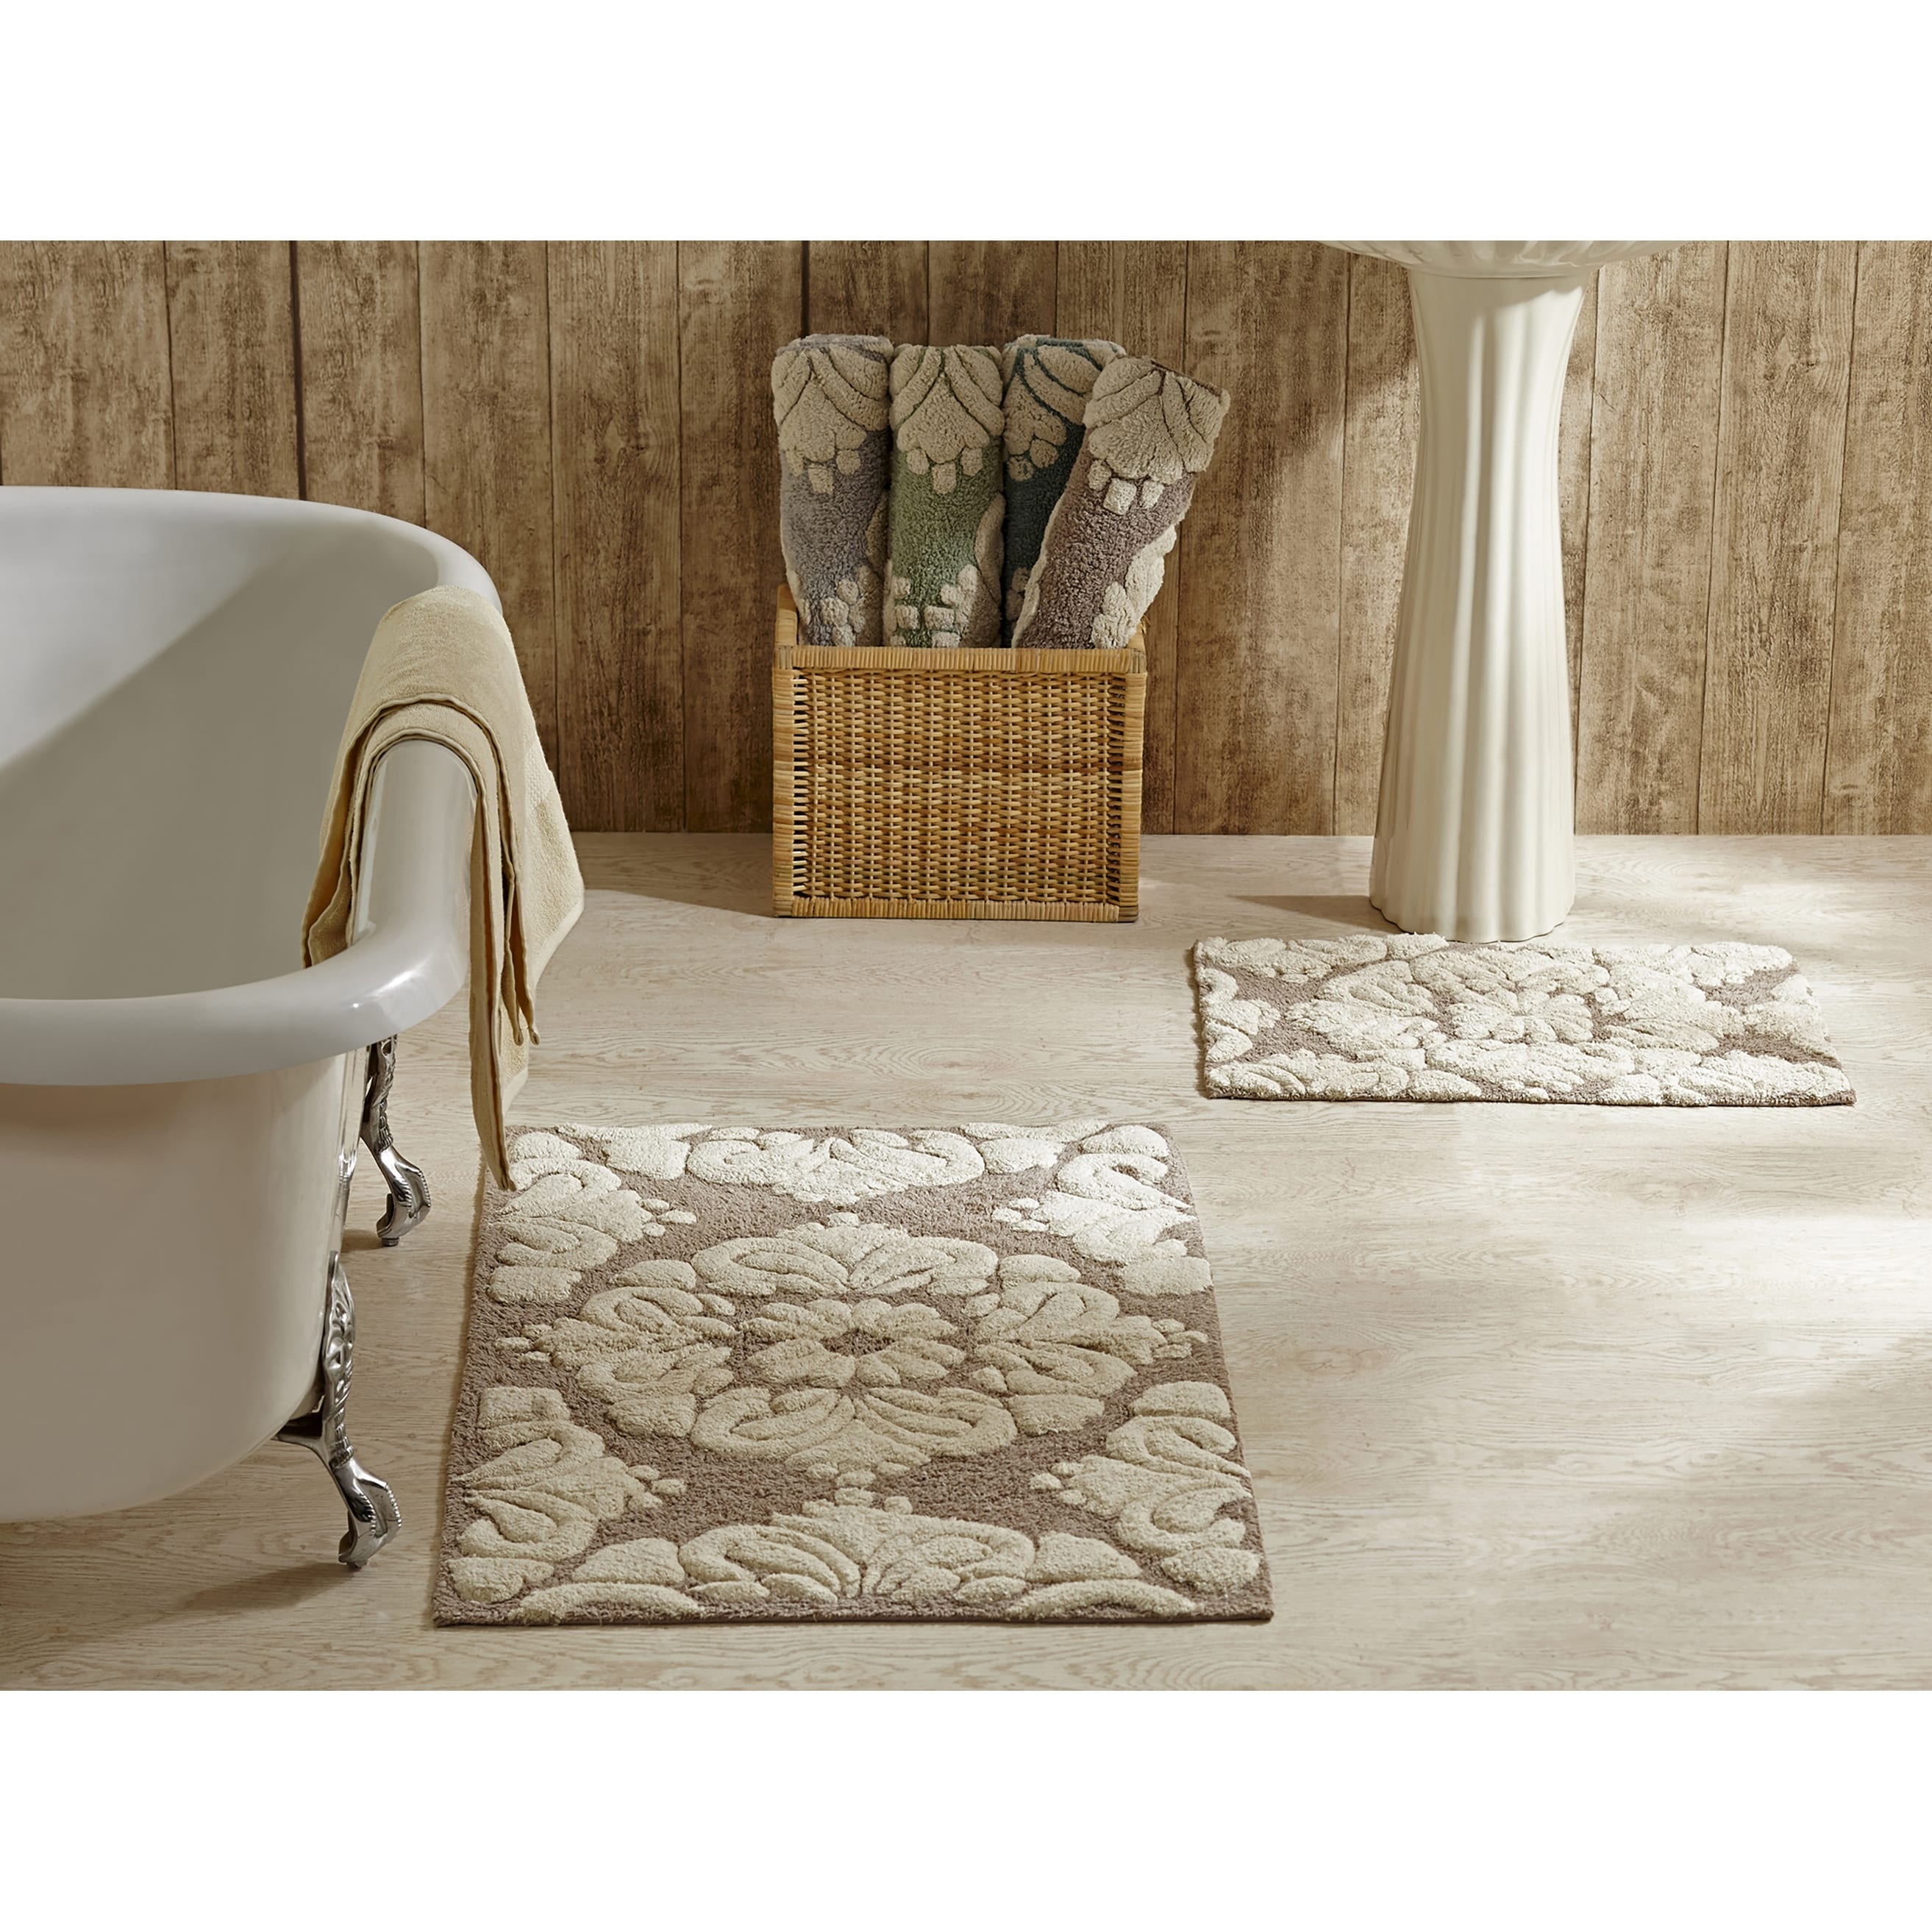 https://ak1.ostkcdn.com/images/products/is/images/direct/86d74ccd27fcfbb5efa84a127ab2e2643f5334c2/Better-Trends-Medallion-Tufted-Bath-Mat-Rug-100%25-Cotton.jpg